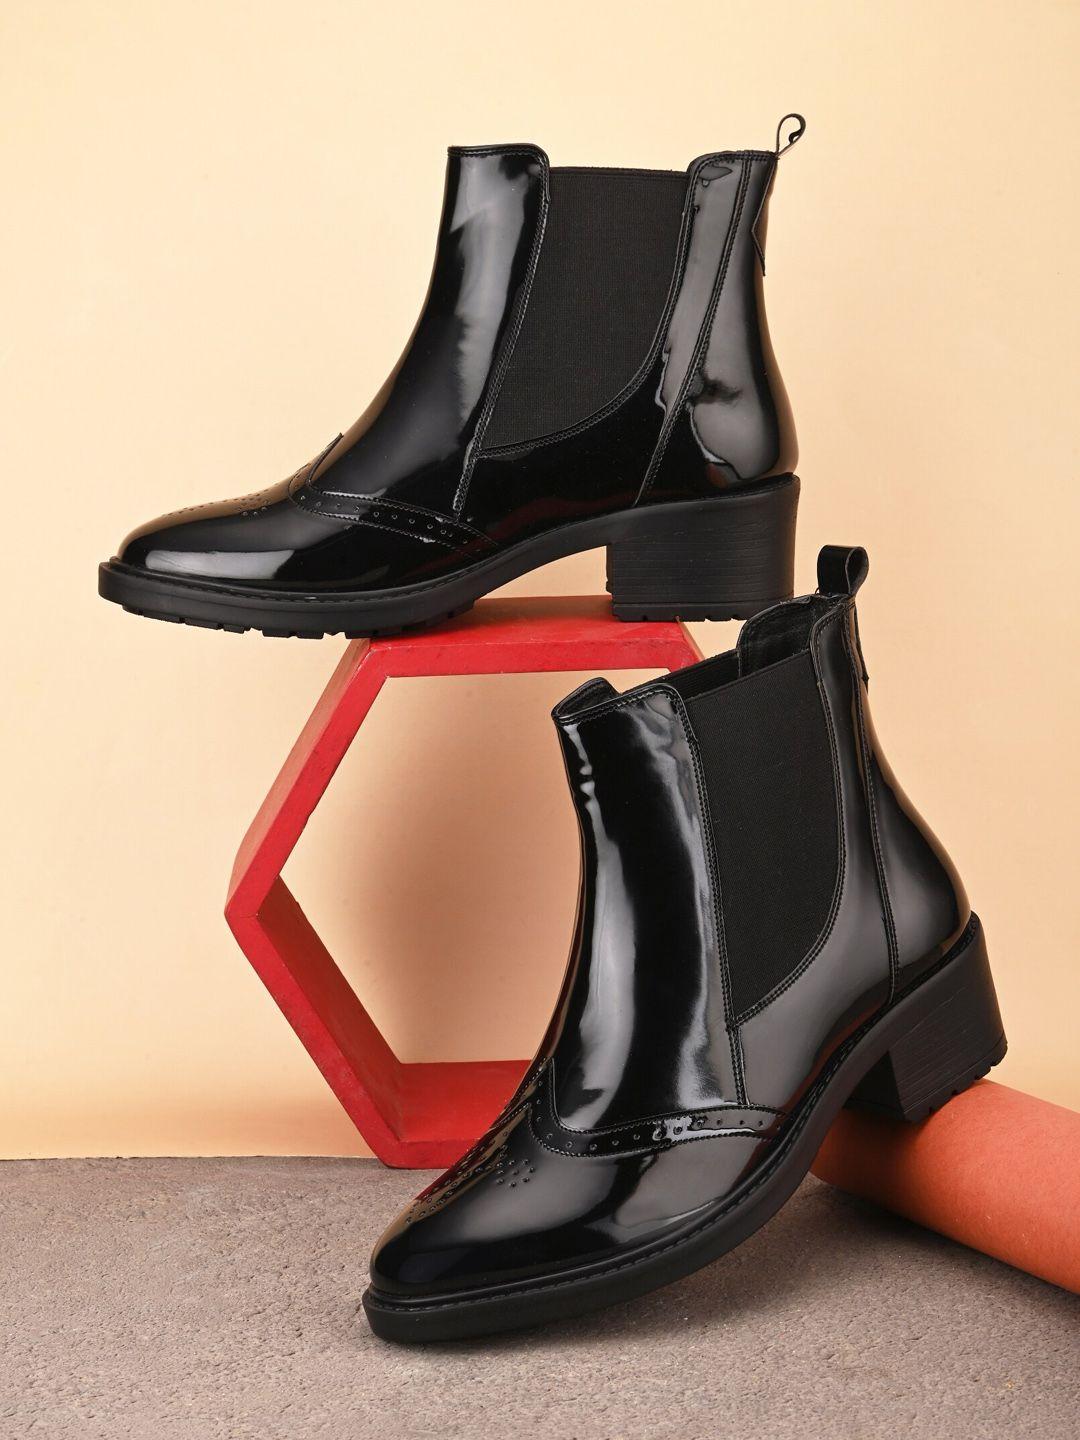 the roadster lifestyle co. women black heeled mid-top chelsea boots